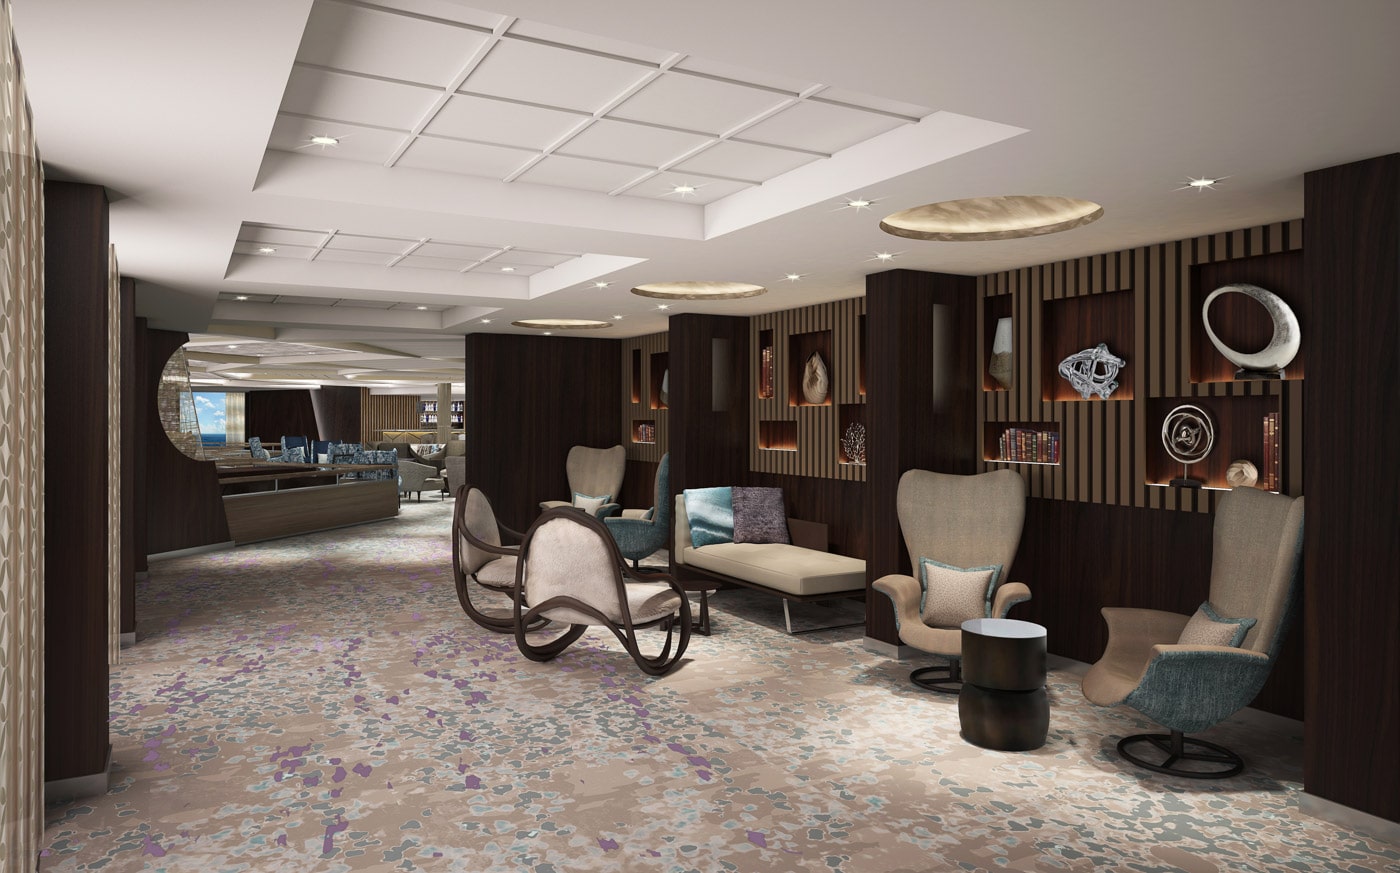 Rendezvous Lounge - hospitality interior design project by JW Studio